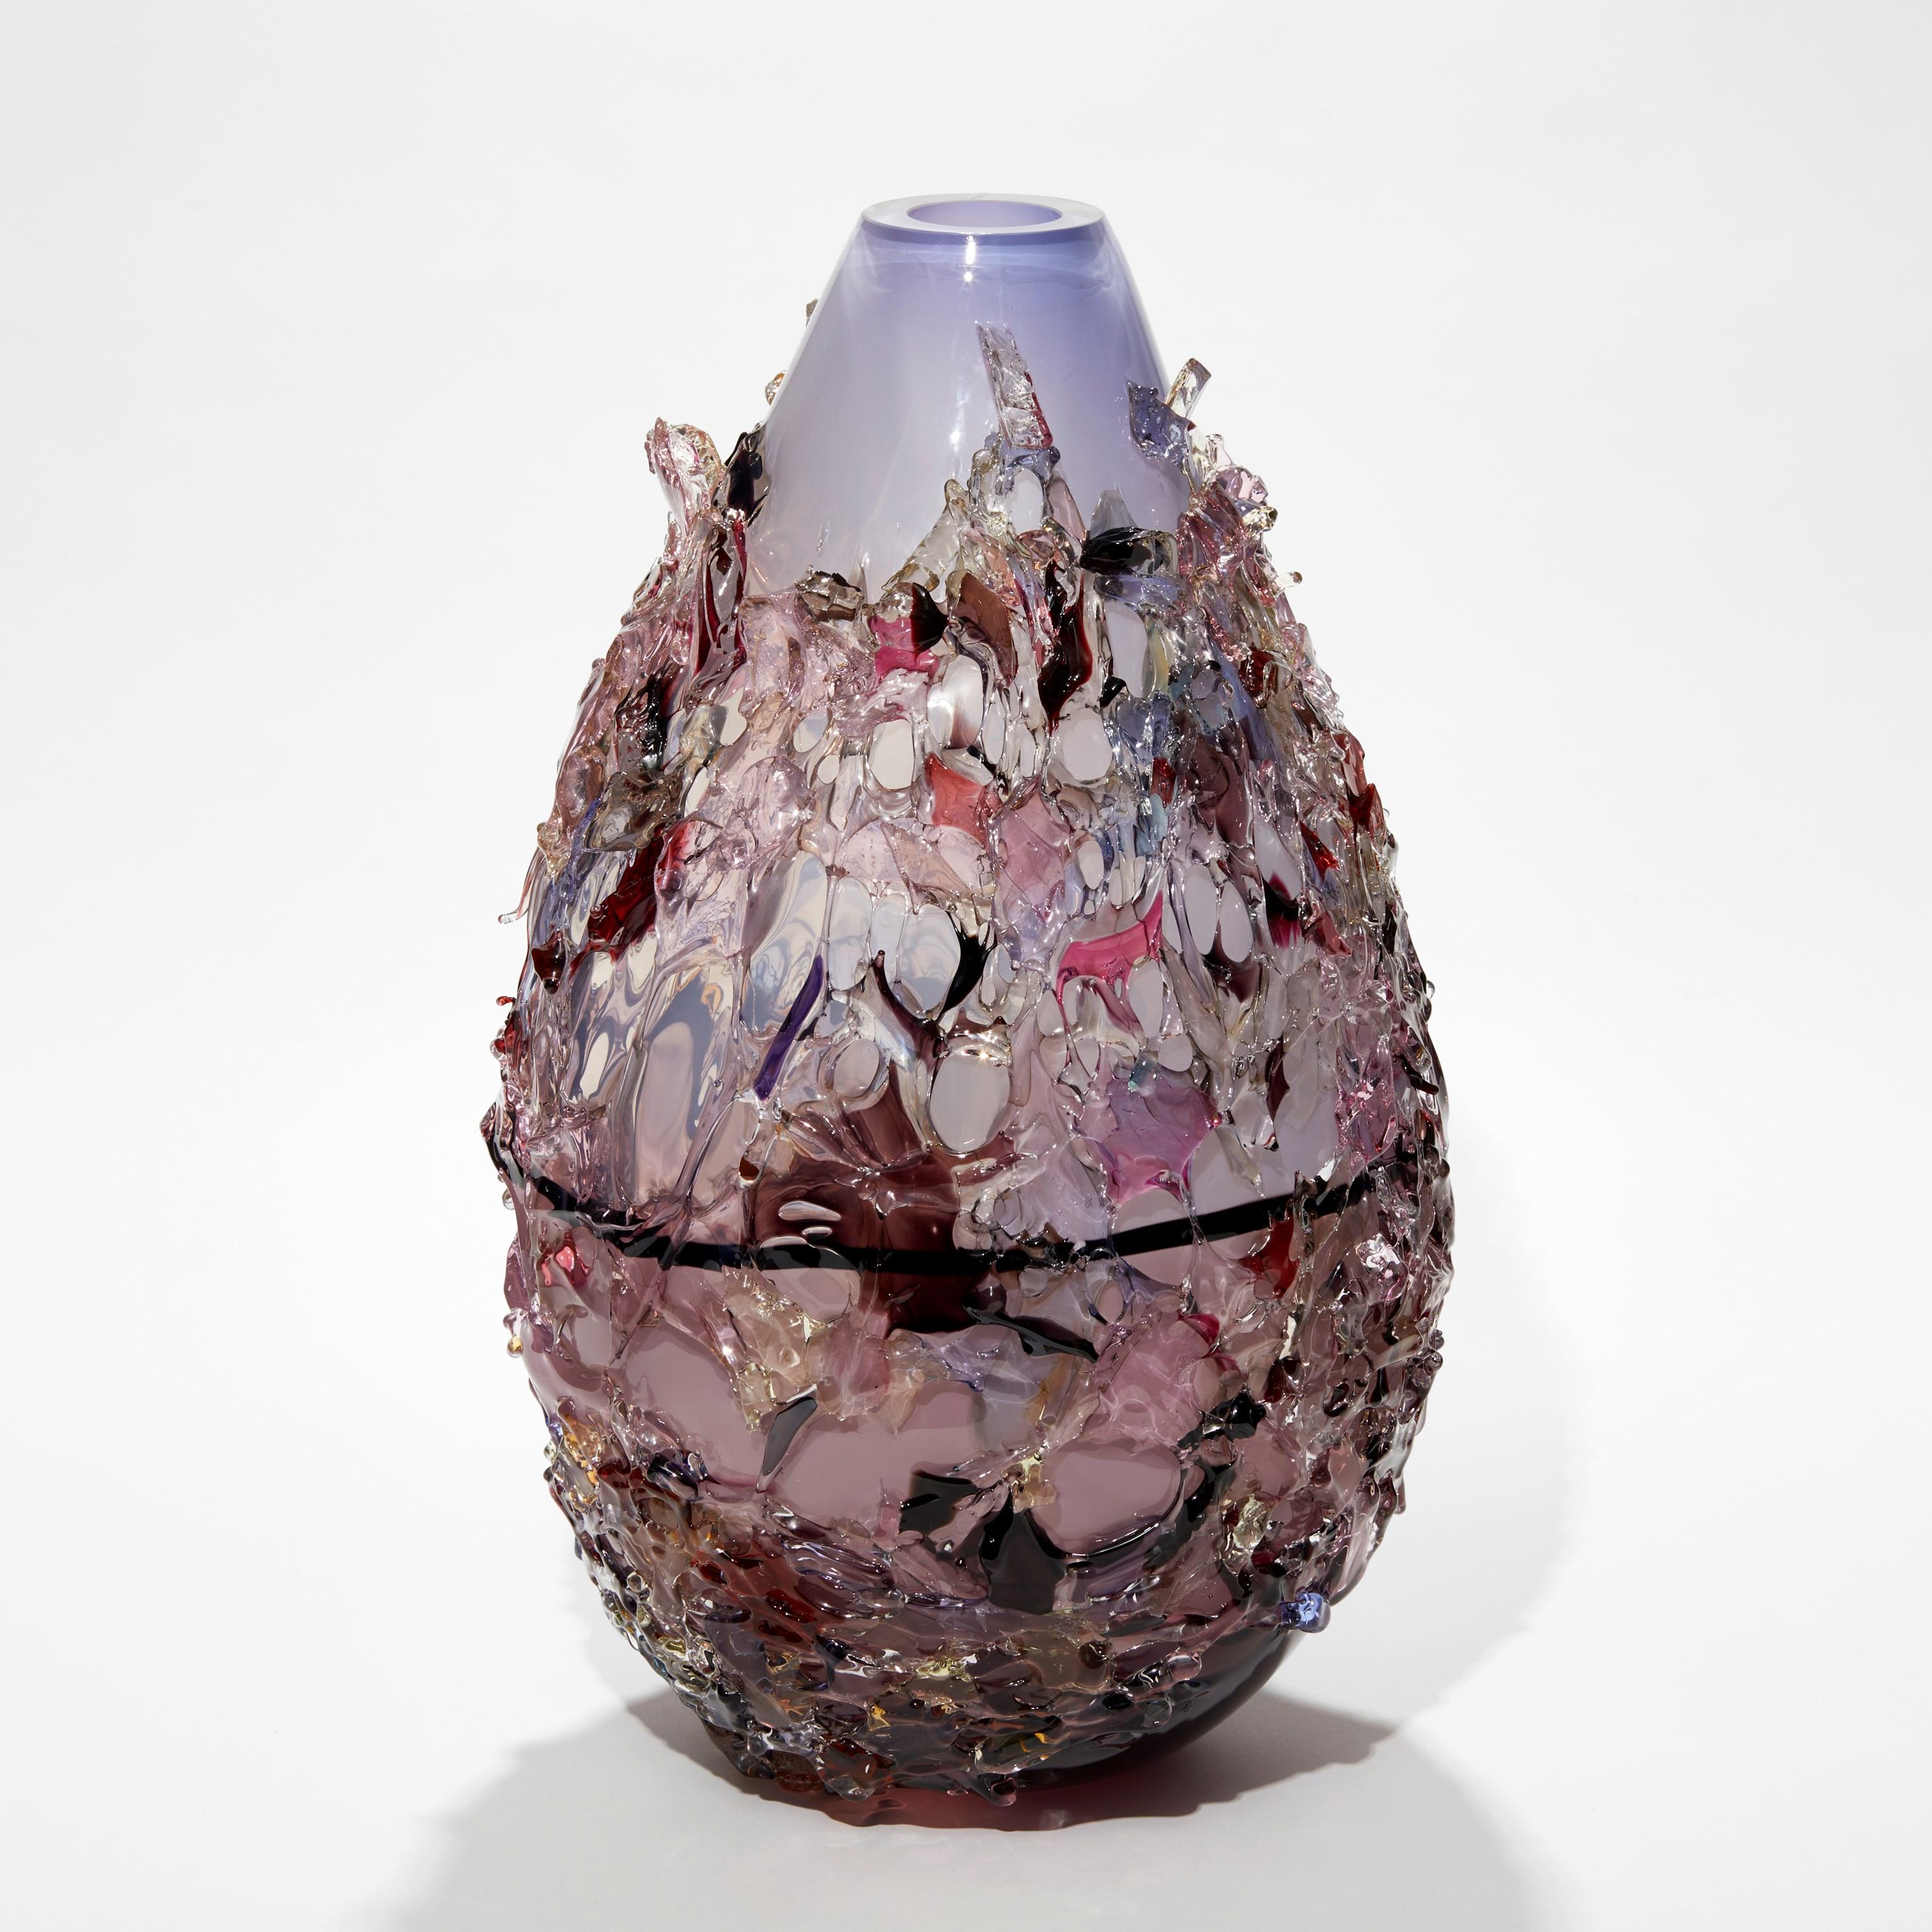 Sakura TRP22018 is a unique aubergine and lilac and multicolored hand-blown art glass sculptural vase, covered in an organic glass shard adornment by the Dutch artist Maarten Vorlijk. The piece is flame polished to soften the edges of all the